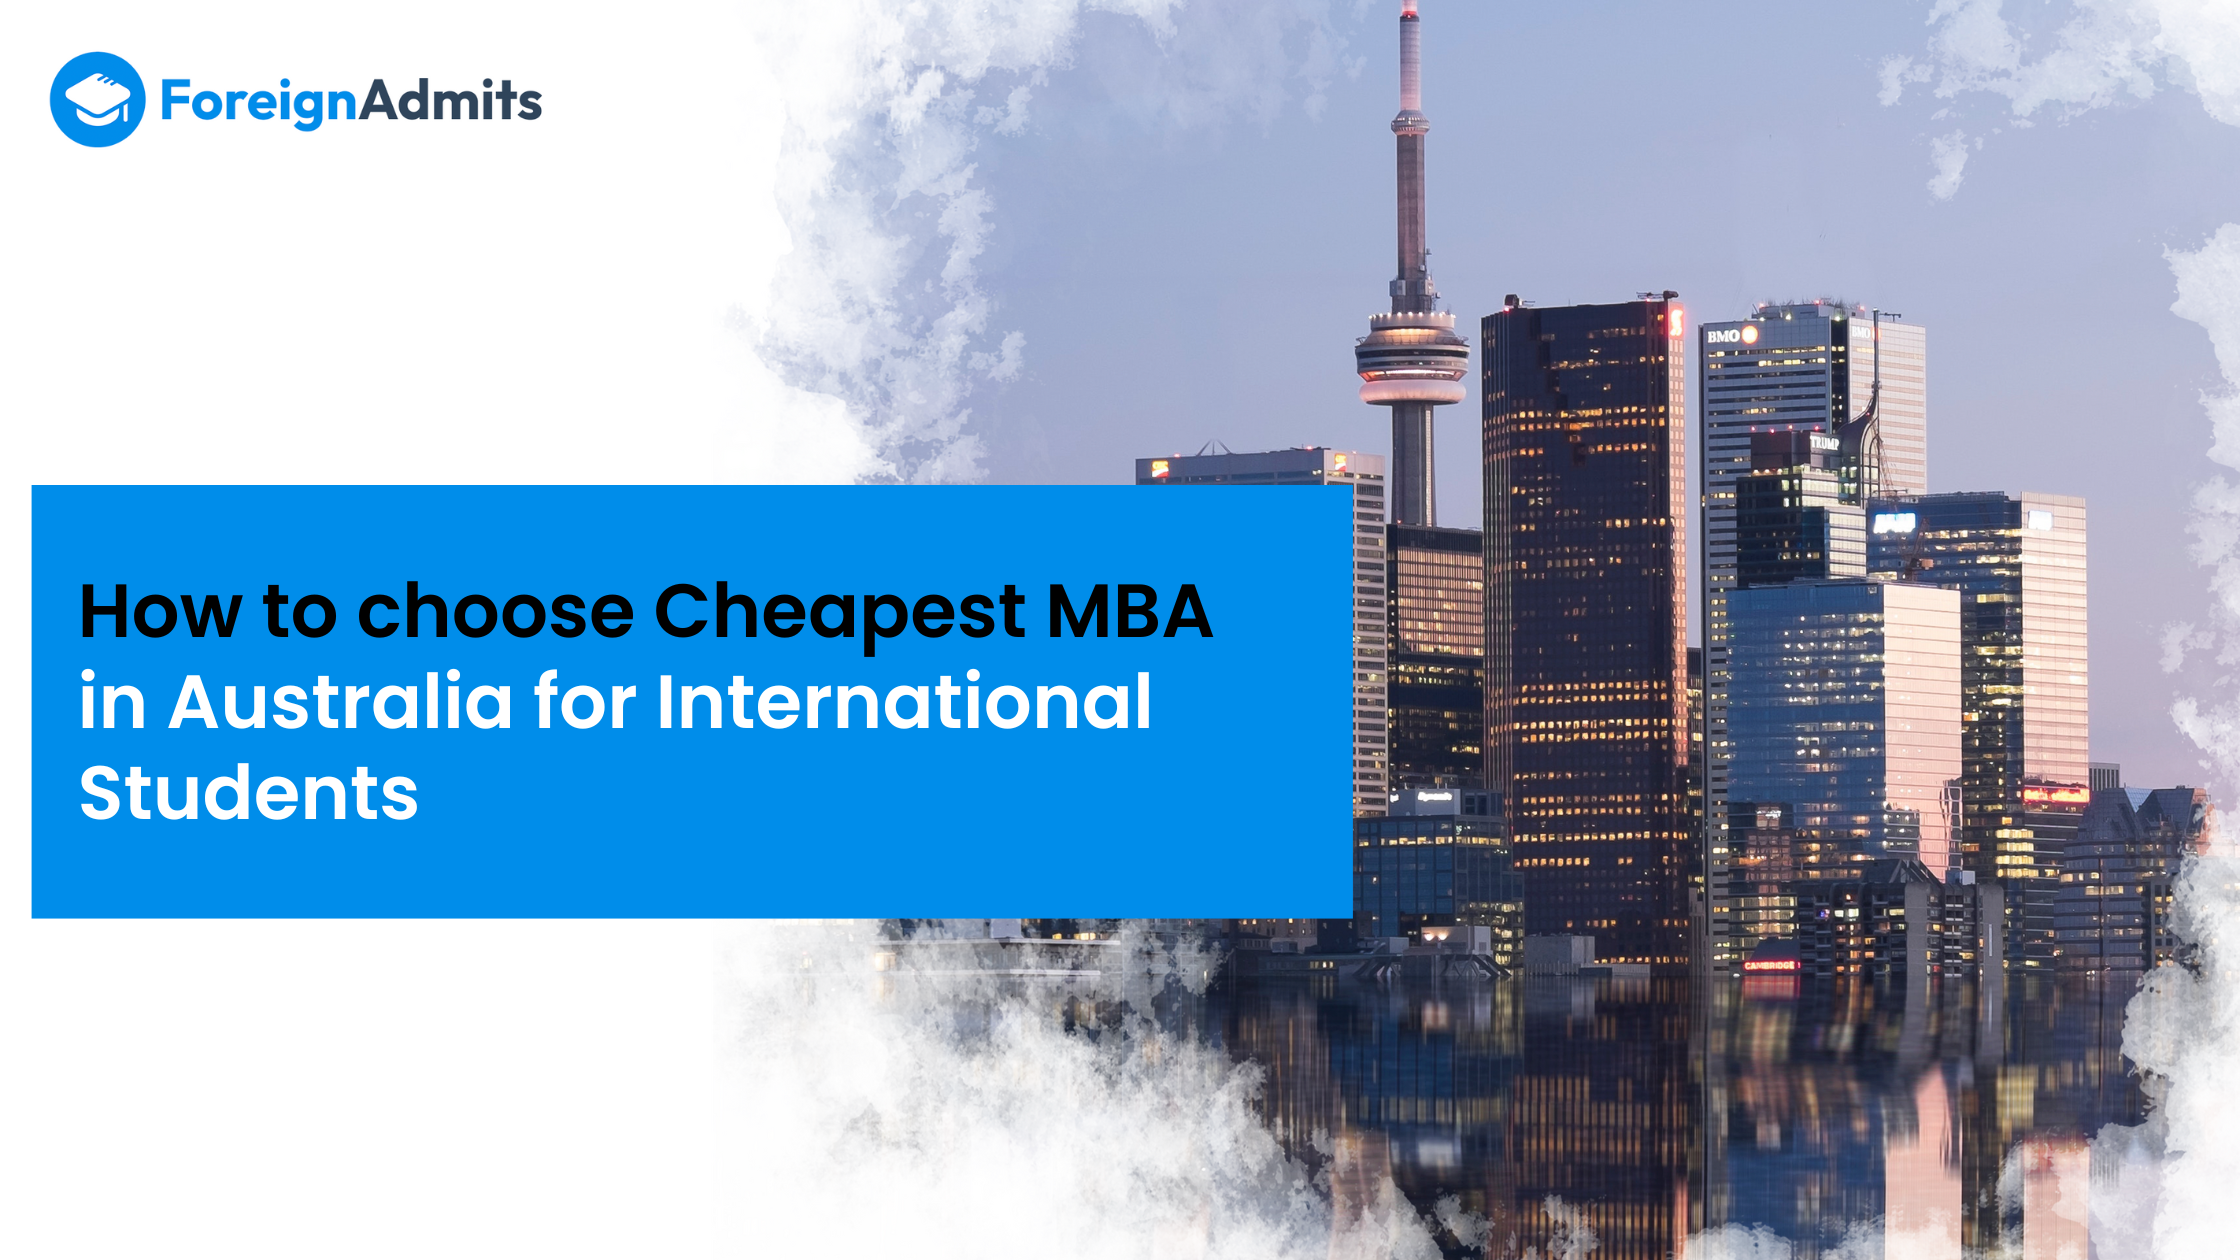 How To Choose Cheapest MBA in Australia for International Students?